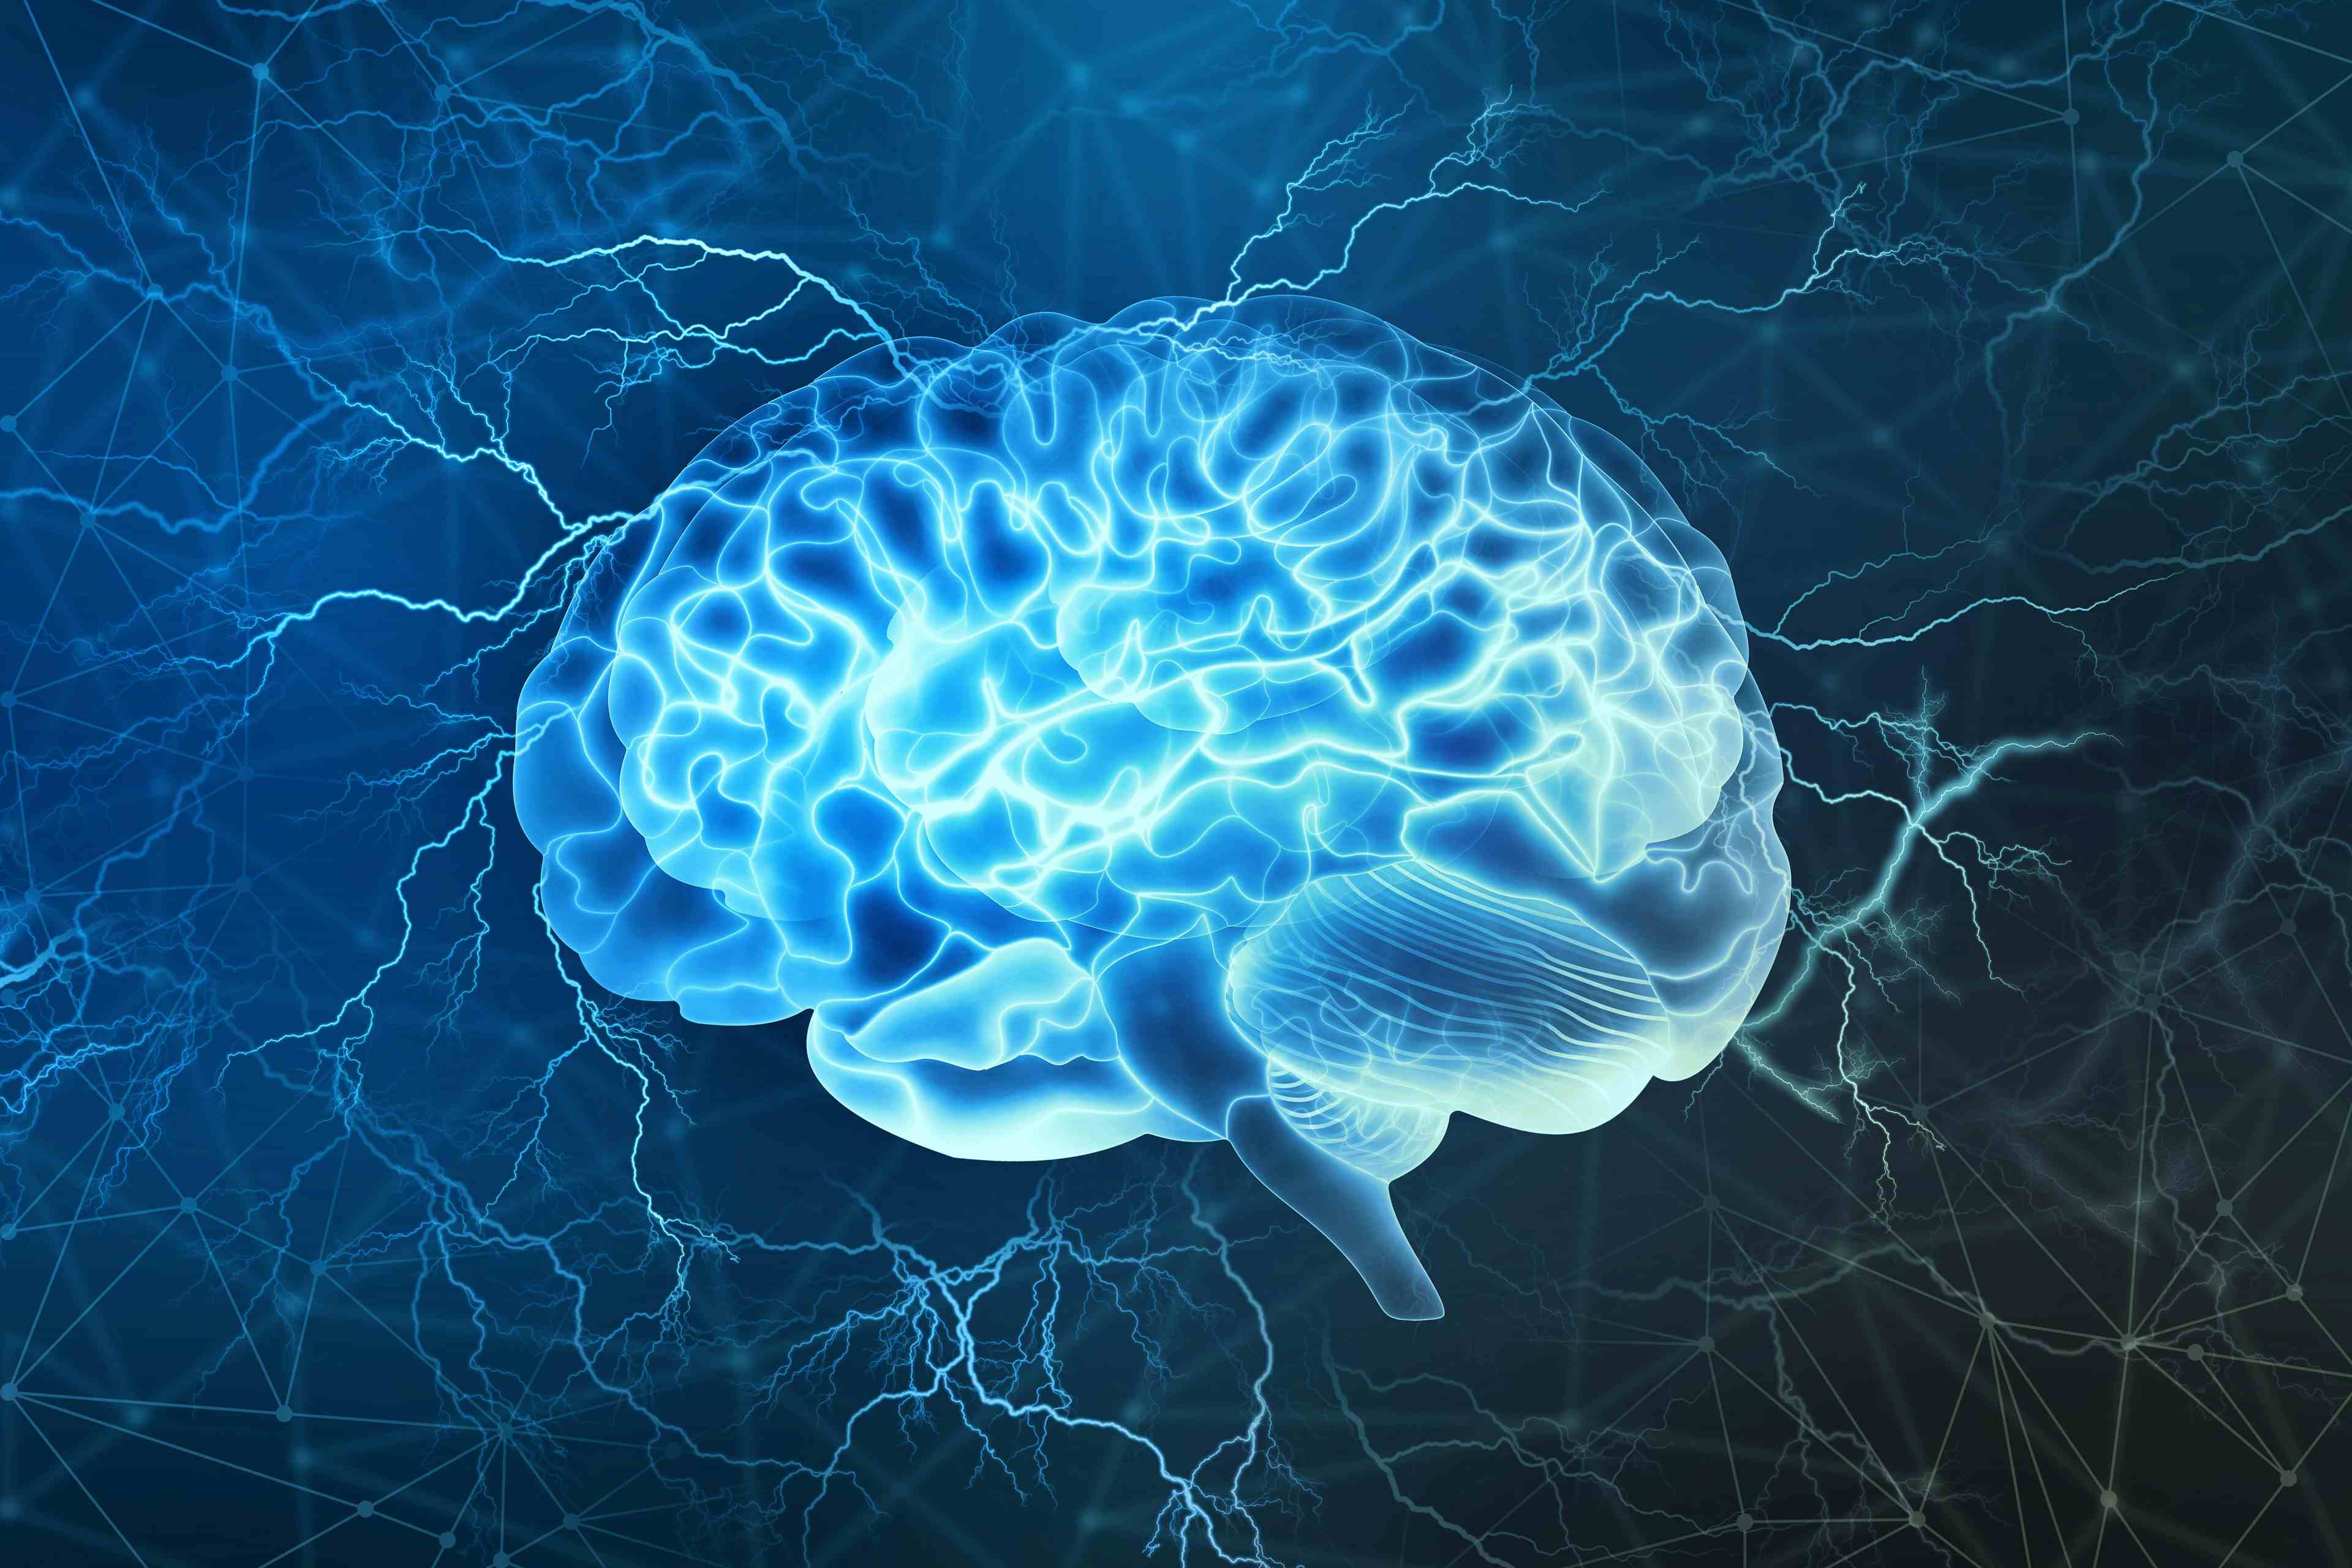 Human brain digital illustration. Electrical activity, flashes, and lightning on a blue background. | Image Credit: Siarhei - stock.adobe.com